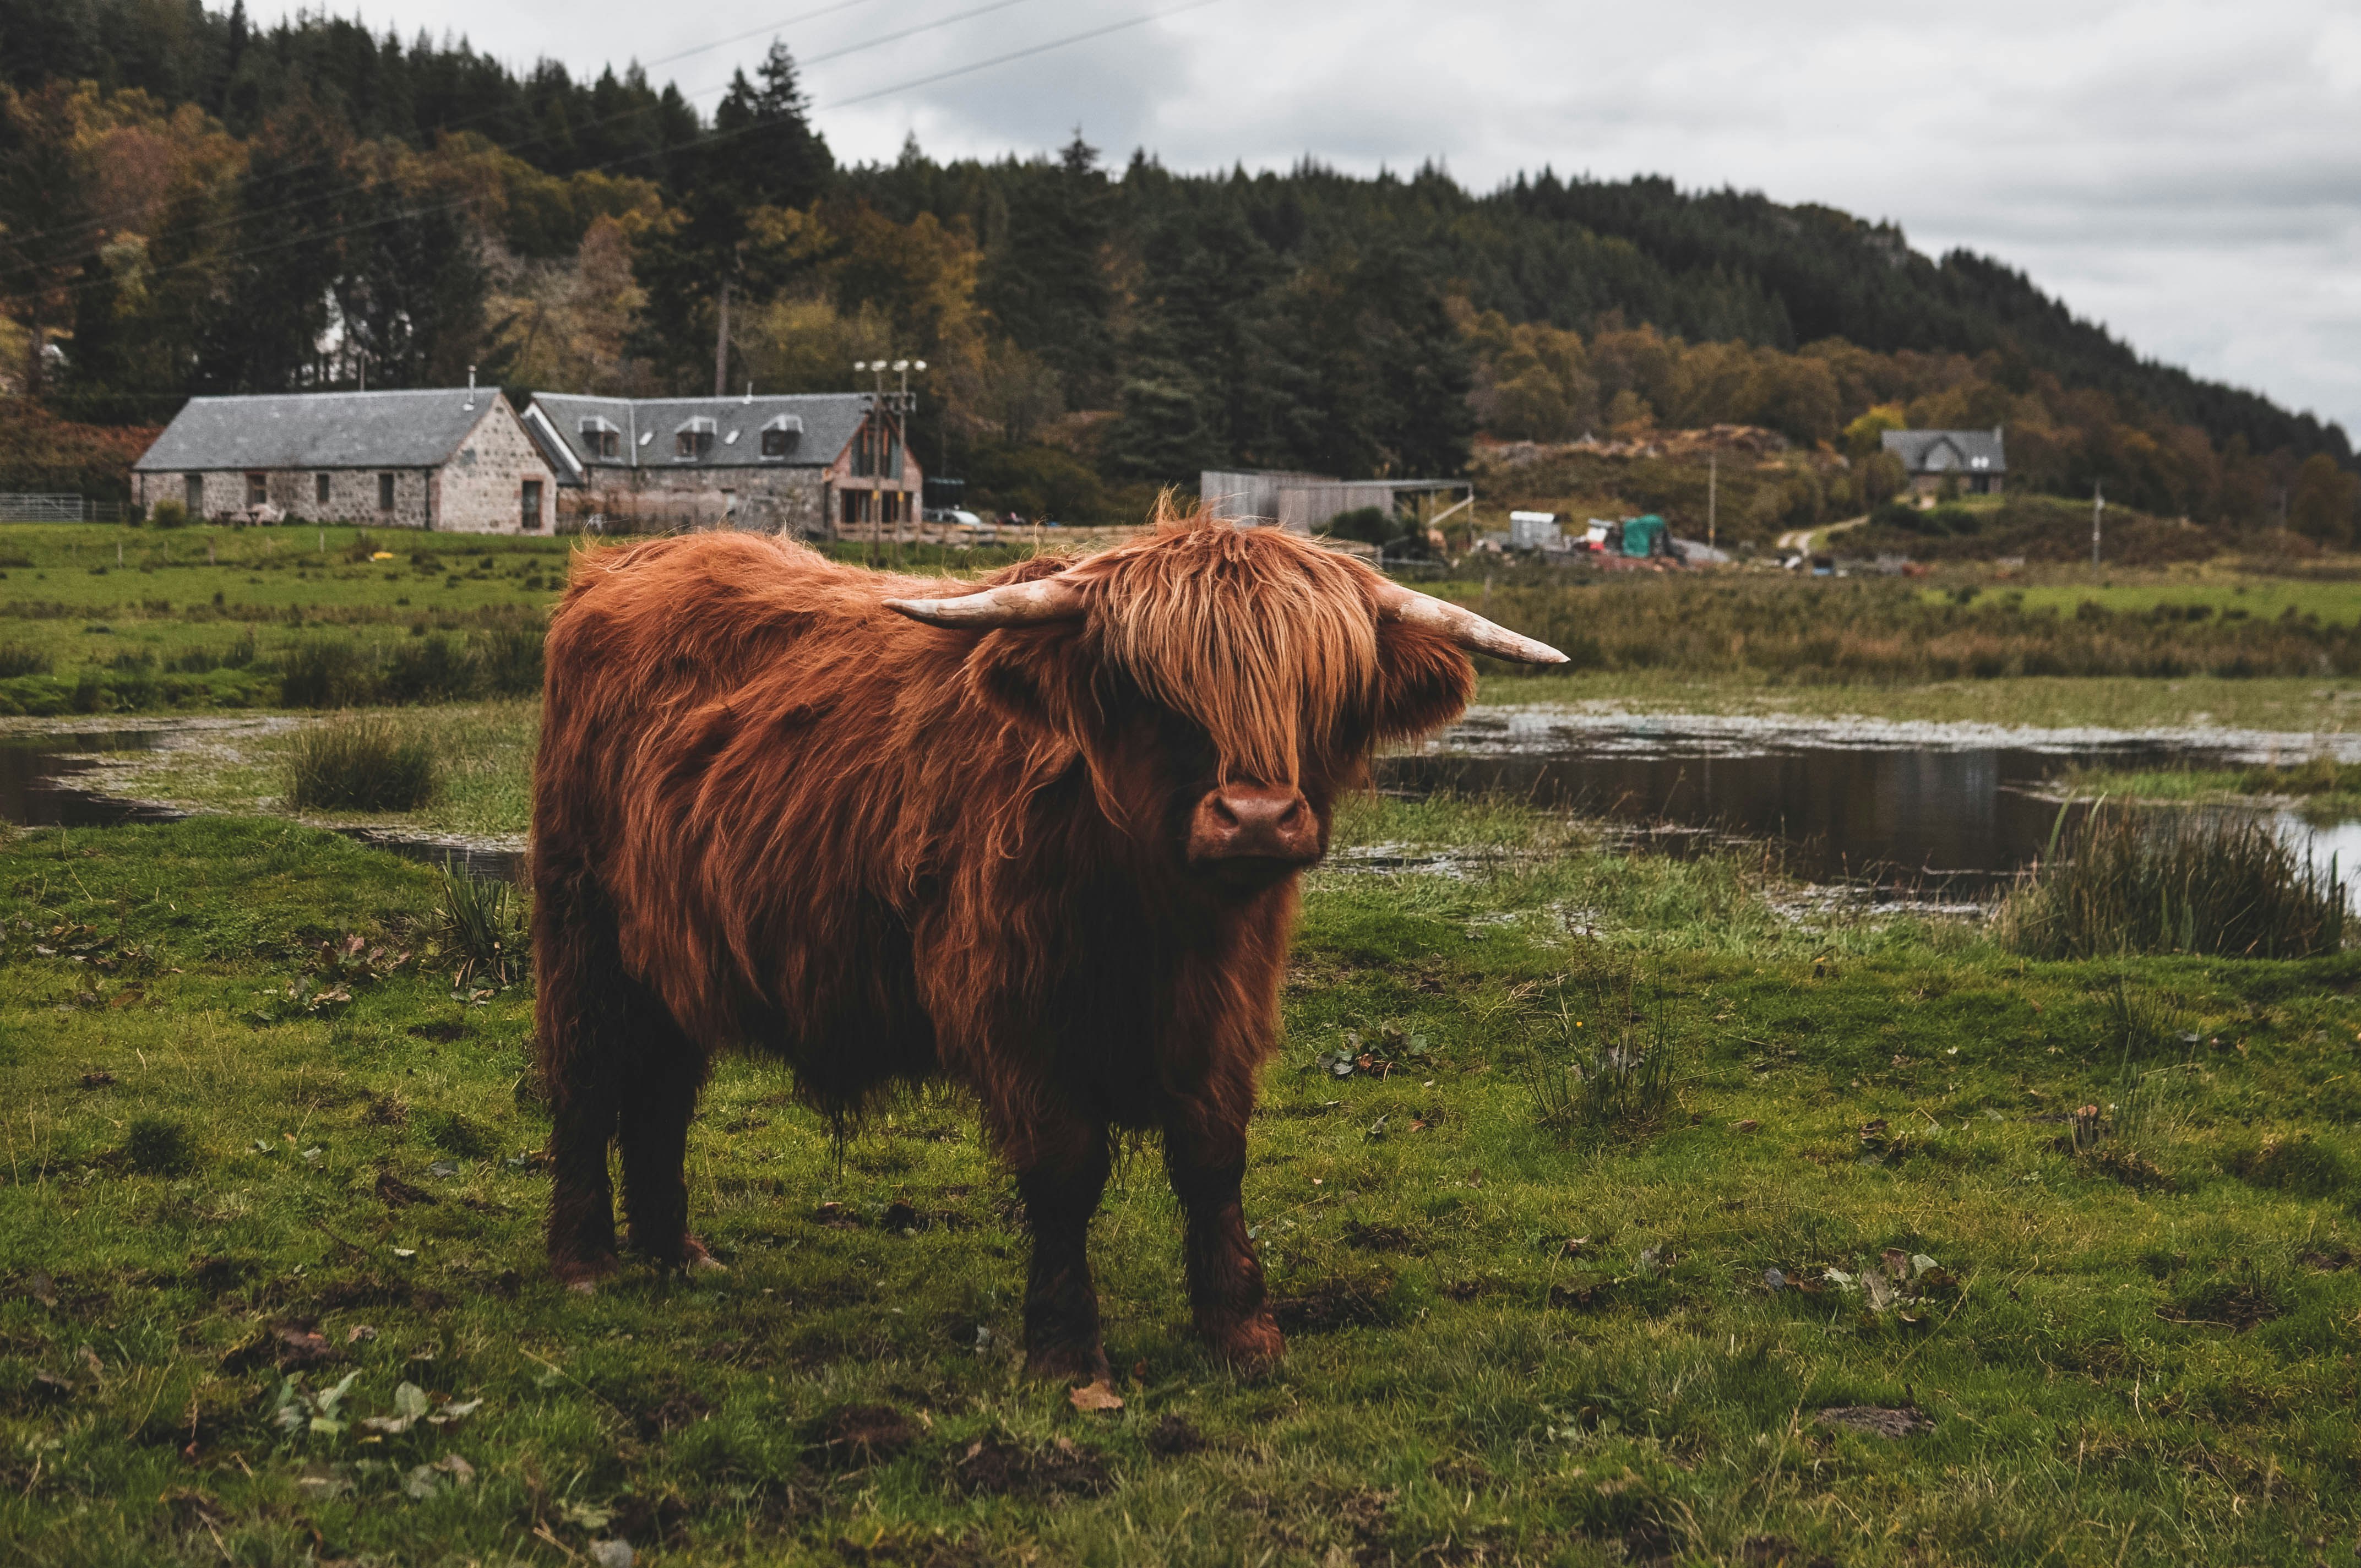 A hairy cow stands in the middle of a field. Stone buildings are visible in the background.